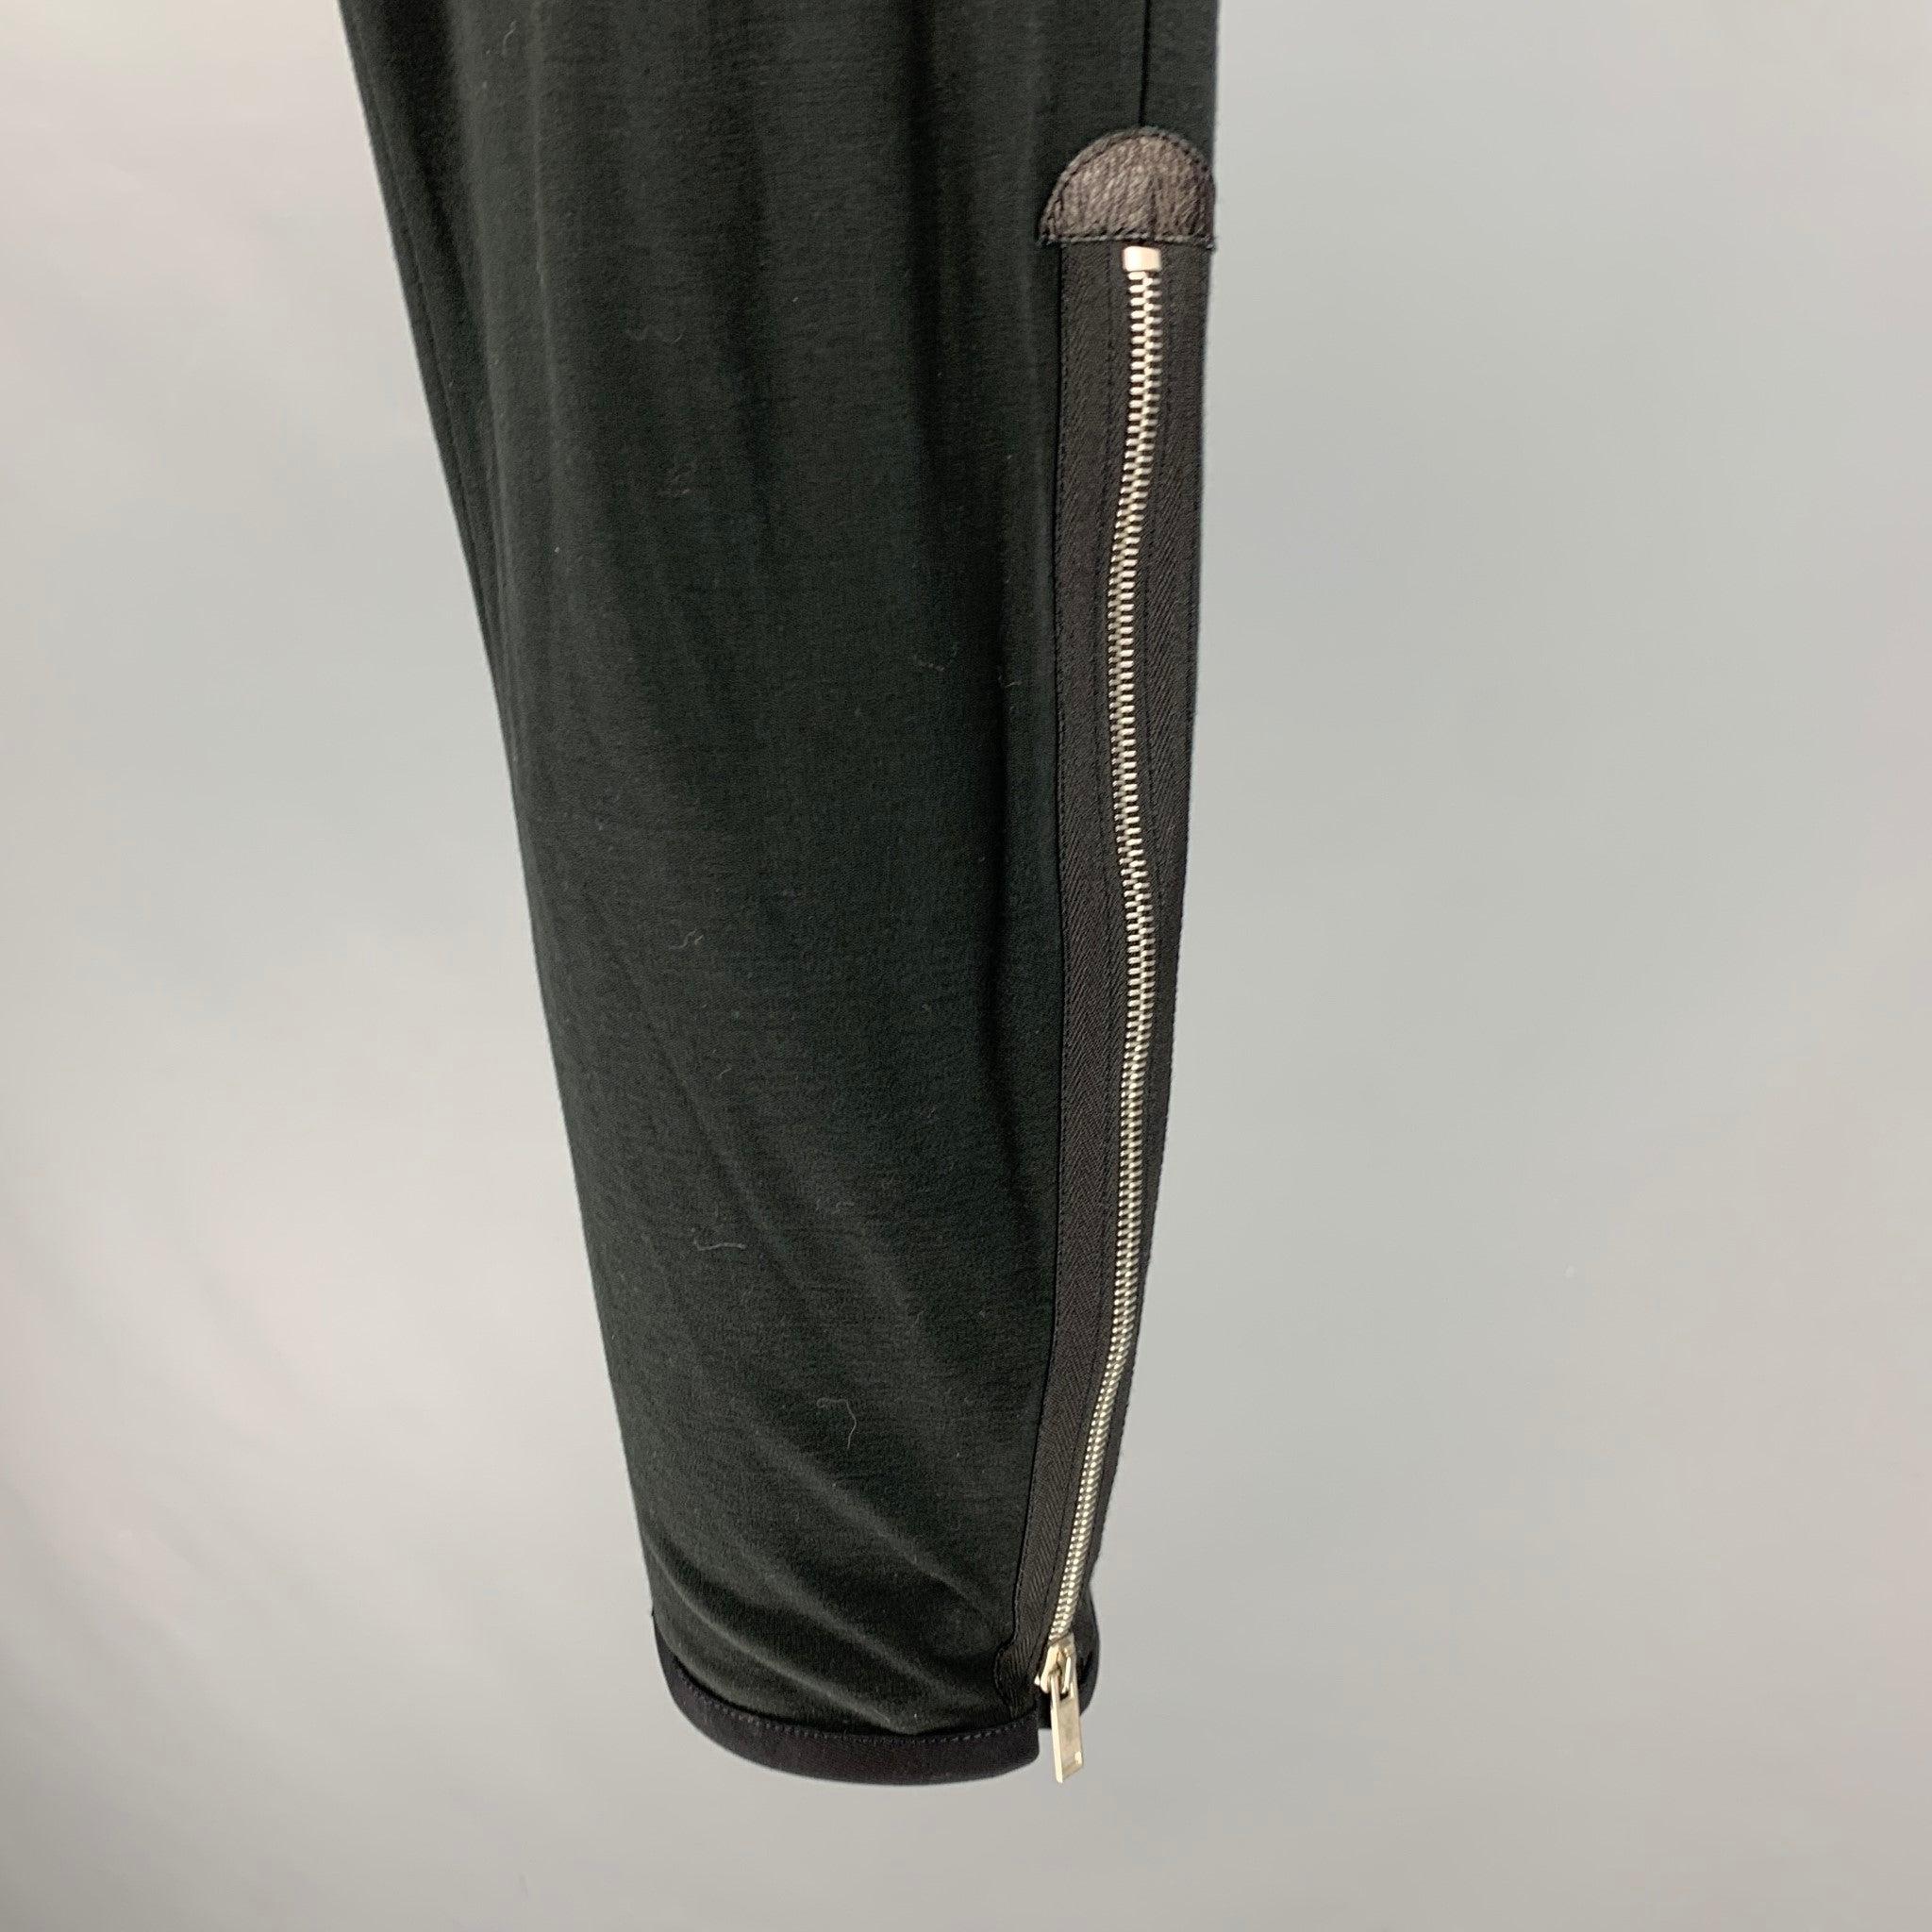 ALEXANDER MCQUEEN dress pants
in a black cotton cashmere blend fabric featuring side zippers and a button fly closure. Made in Hungary.Very Good Pre-Owned Condition. Minor marks. 

Marked:   48 

Measurements: 
  Waist: 32 inches Rise: 9 inches